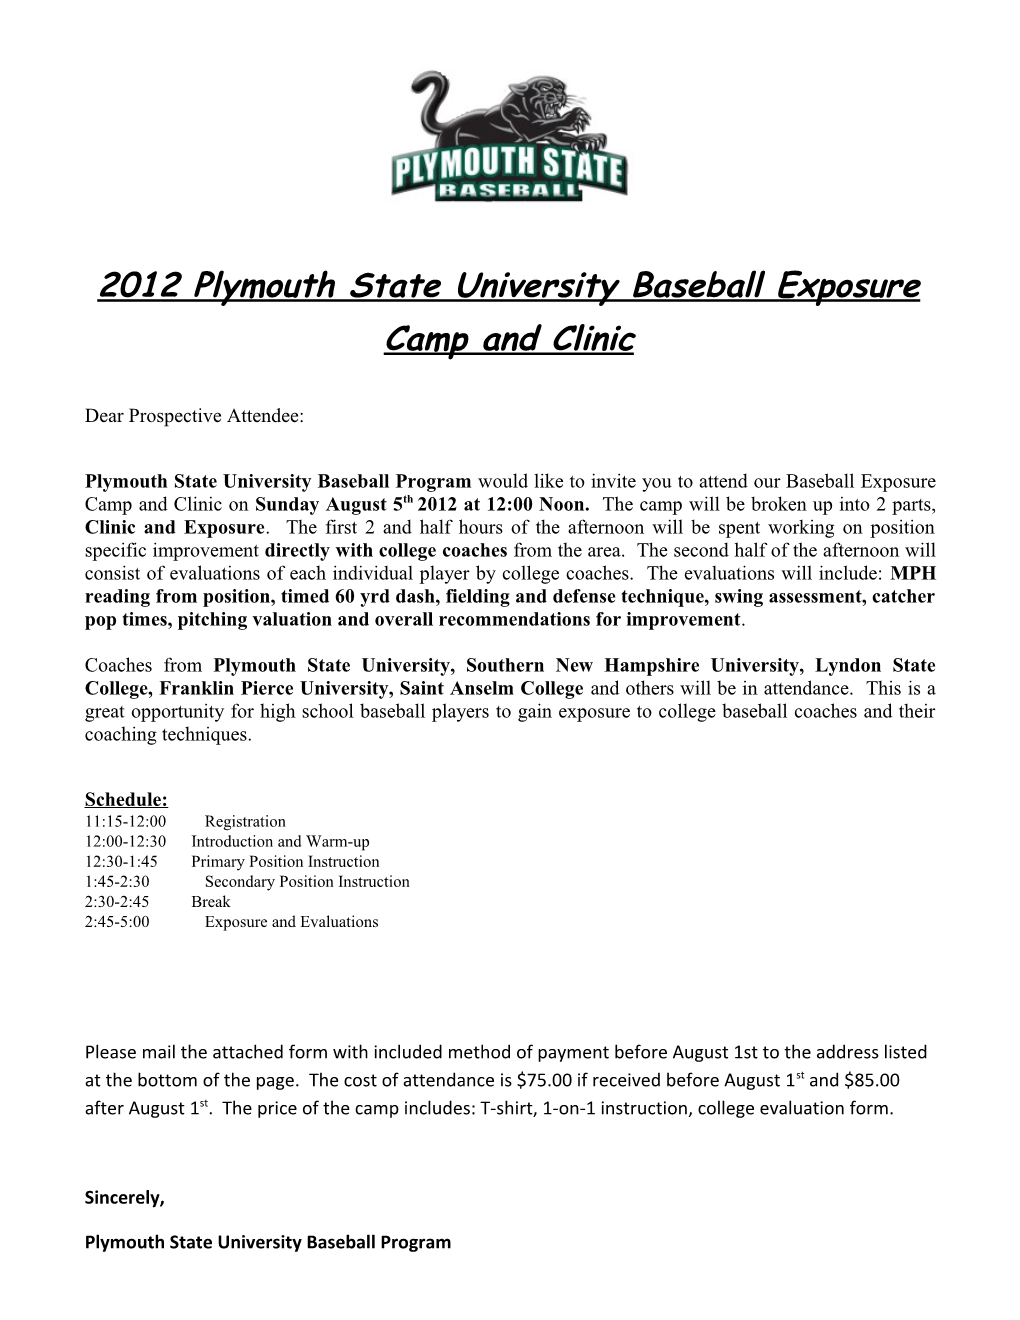 2012 Plymouth State University Baseball Exposure Camp and Clinic